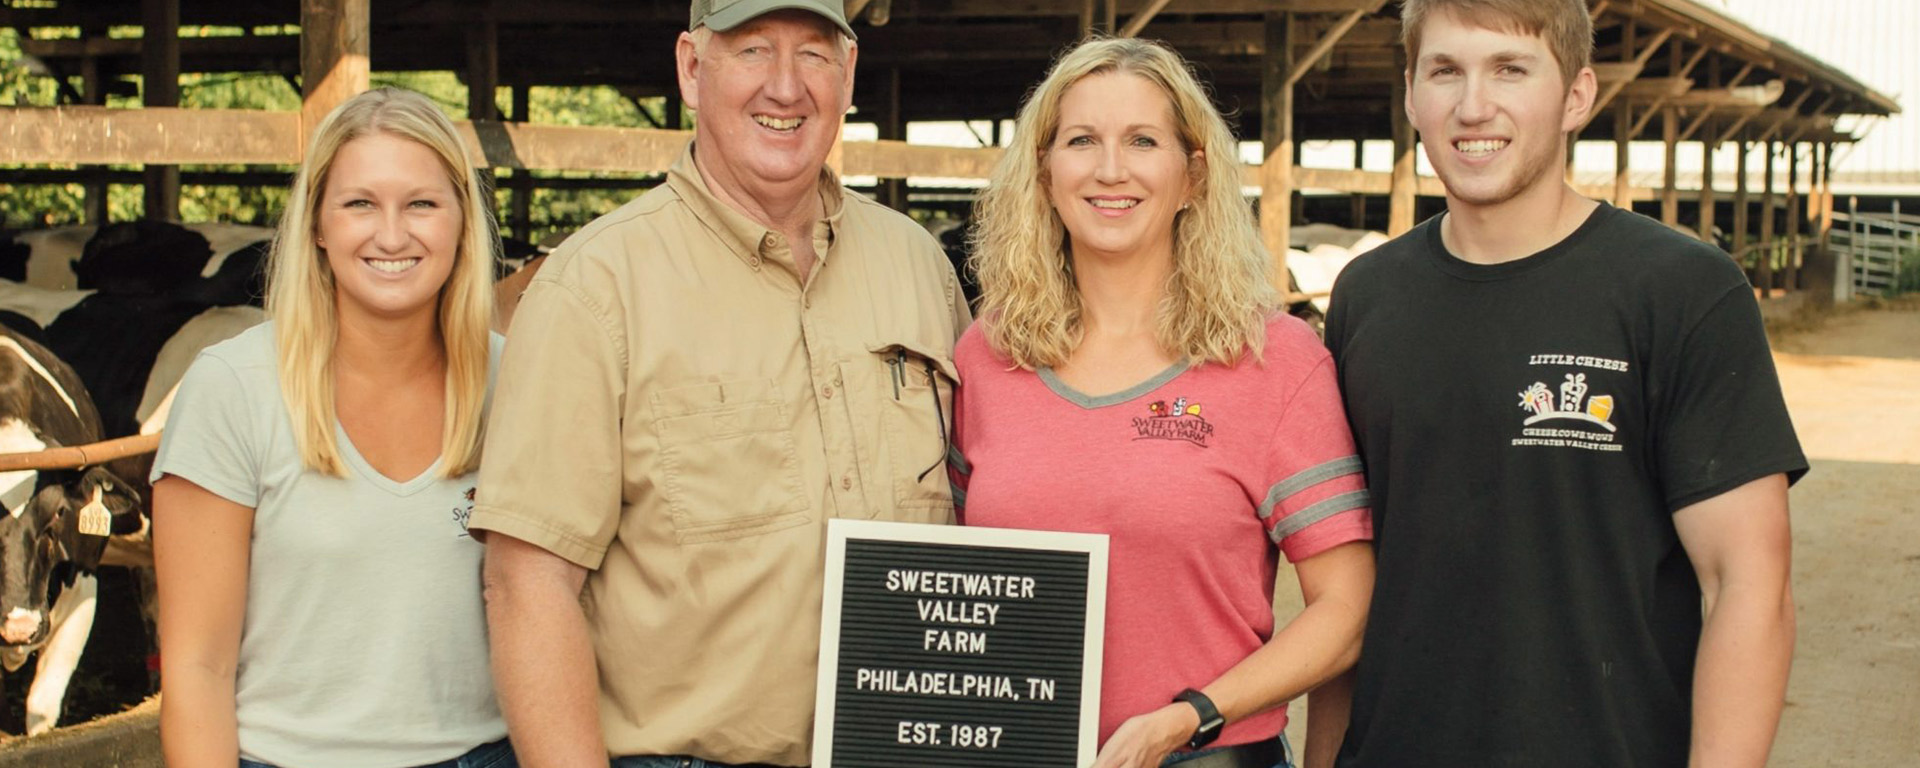 A third-generation dairy farmer, John Harrison of Sweetwater Valley Farm in Philadelphia, Tennessee, has been named the Tennessee Farmer of the year by UT Extension. Harrison is shown here with some of his family who help on the farm. Left to right: daughter Mary Lyndal; Harrison; his wife, Celia; and son Charles. Photo Courtesy Sweetwater Valley Farm